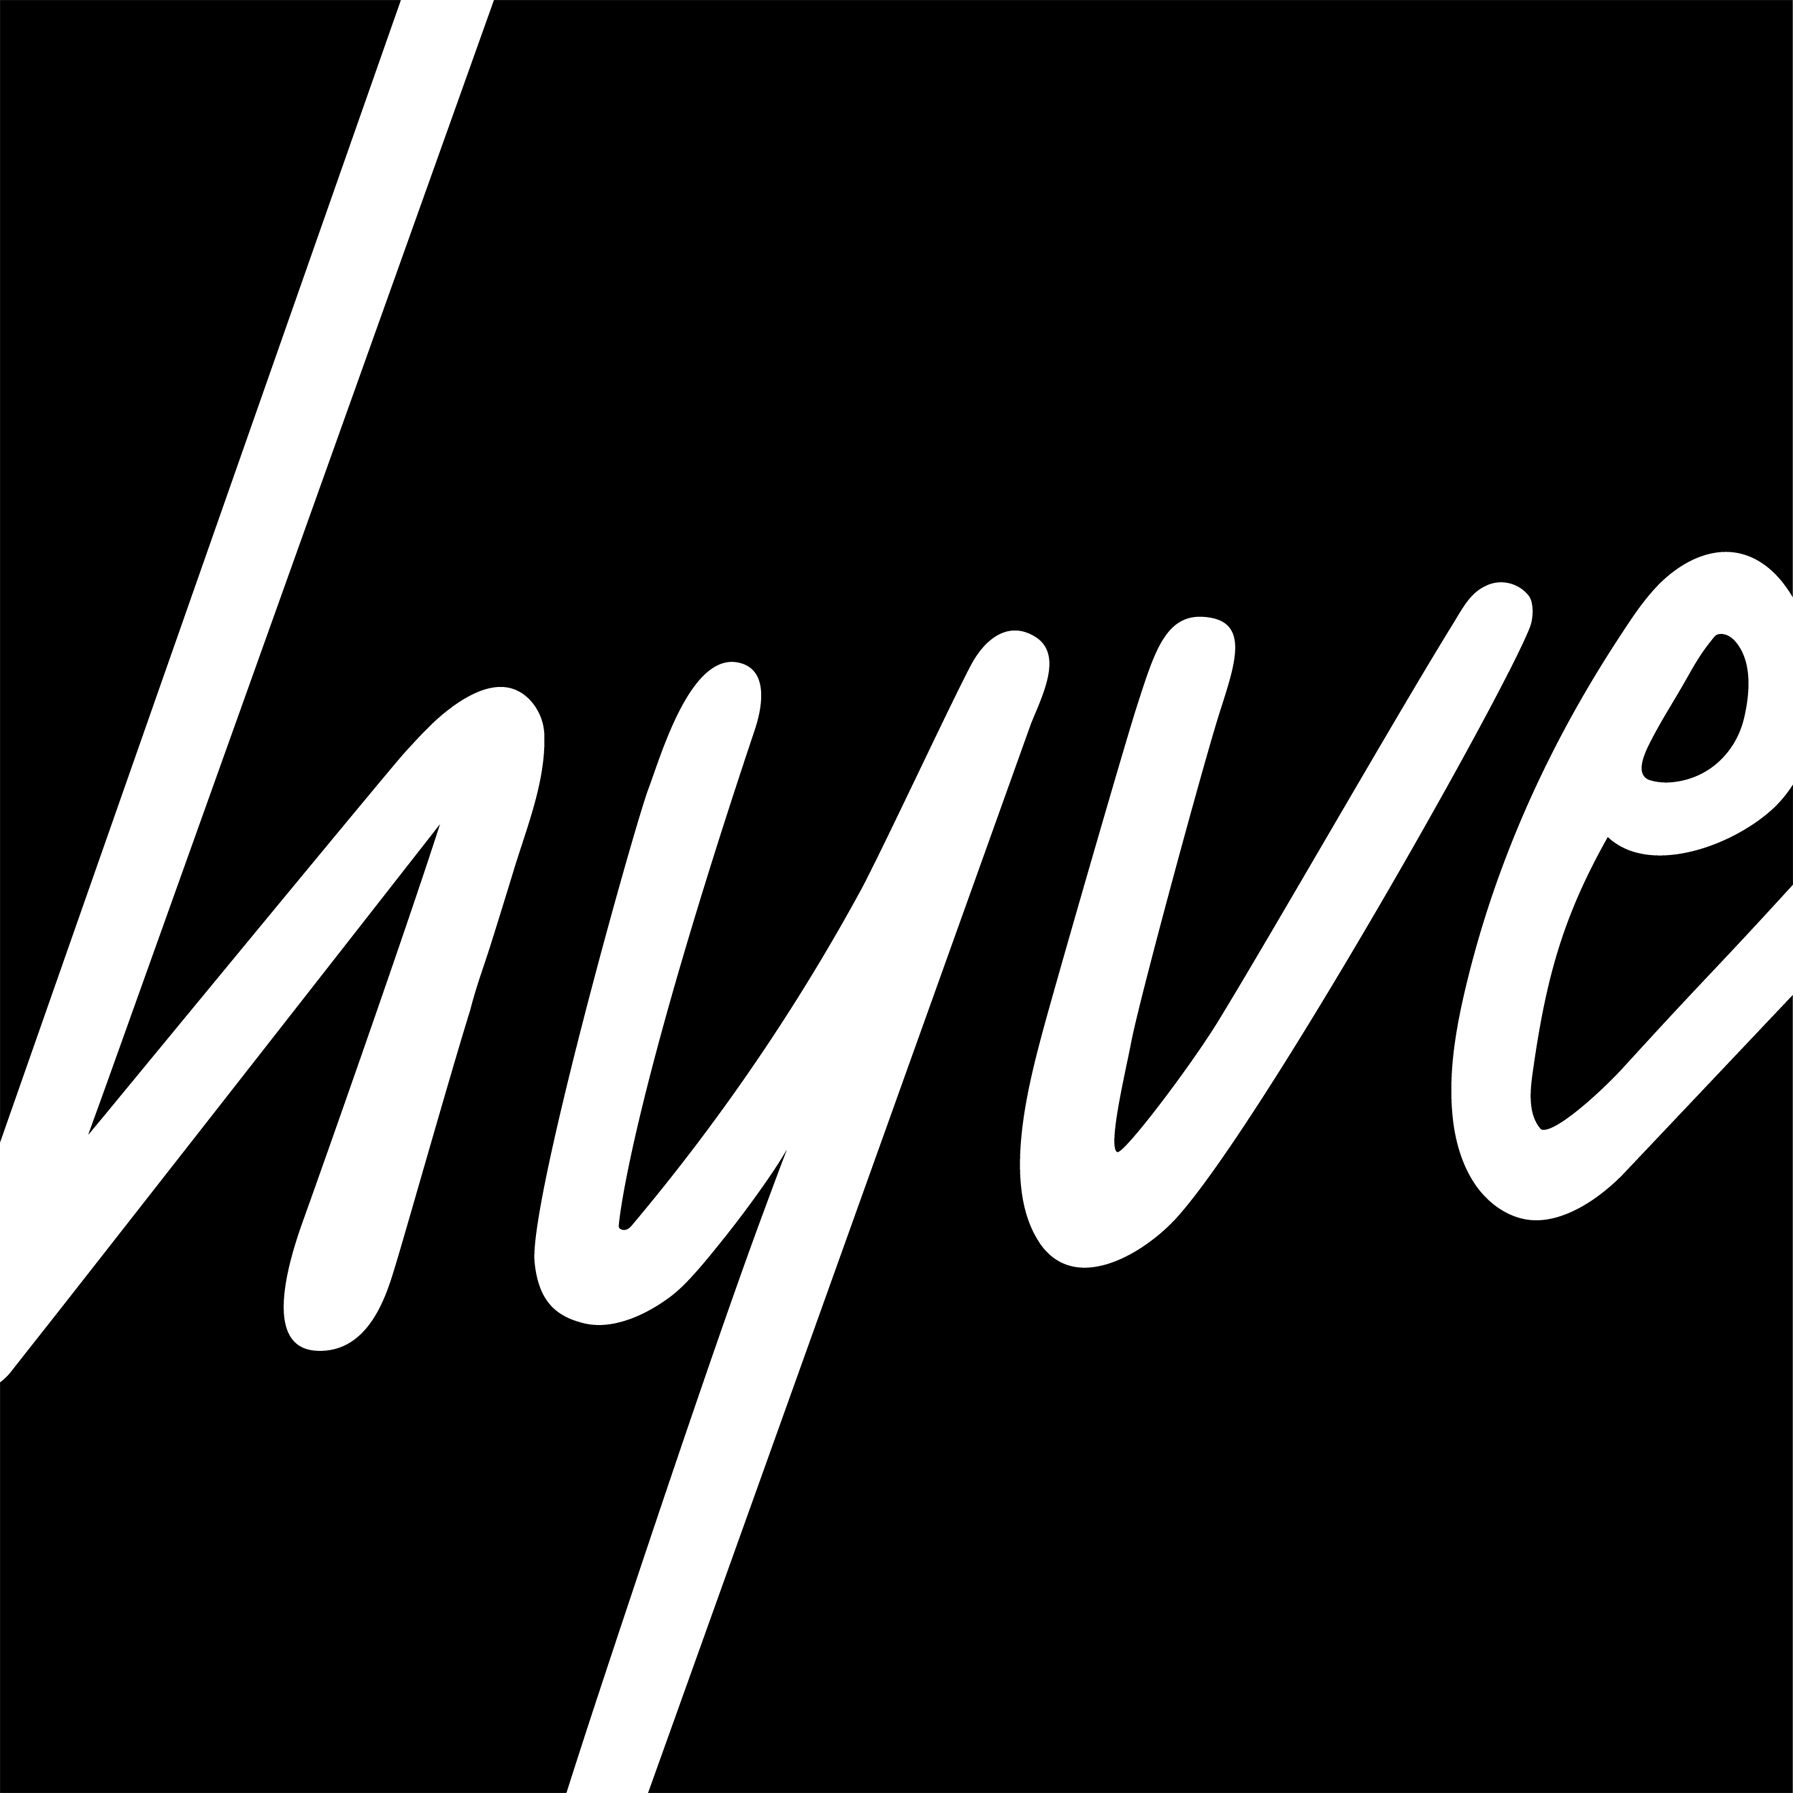 hyve.voices